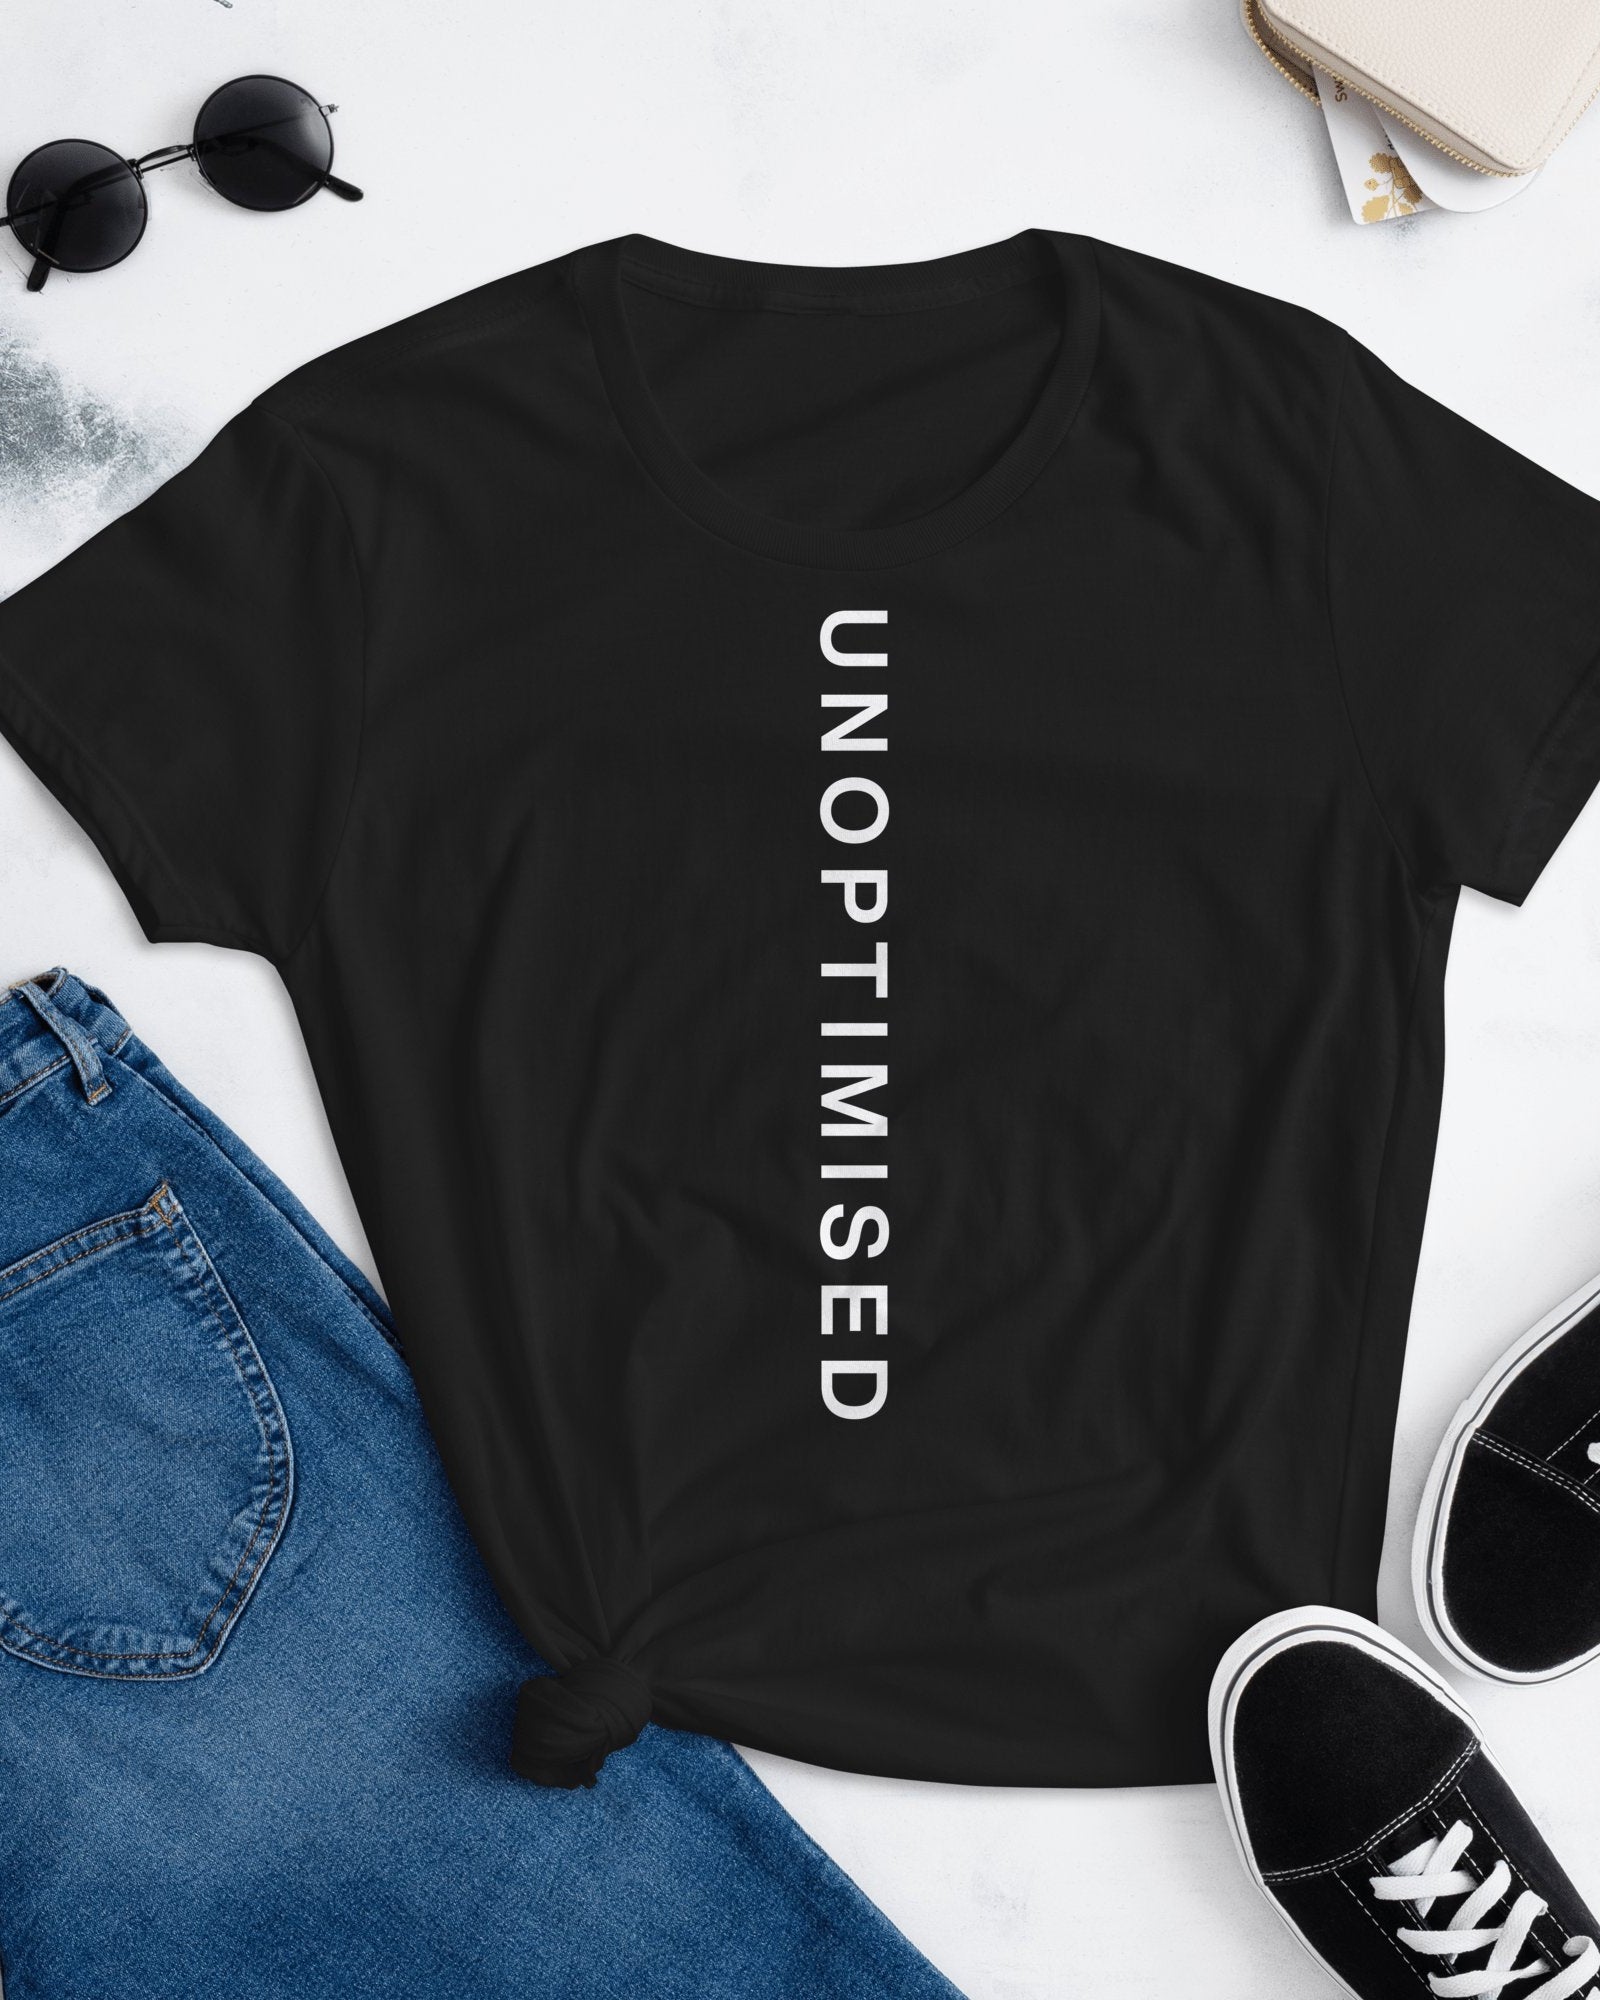 The Unoptimised collection of apparel and gifts for enjoying life's Unoptimised moments